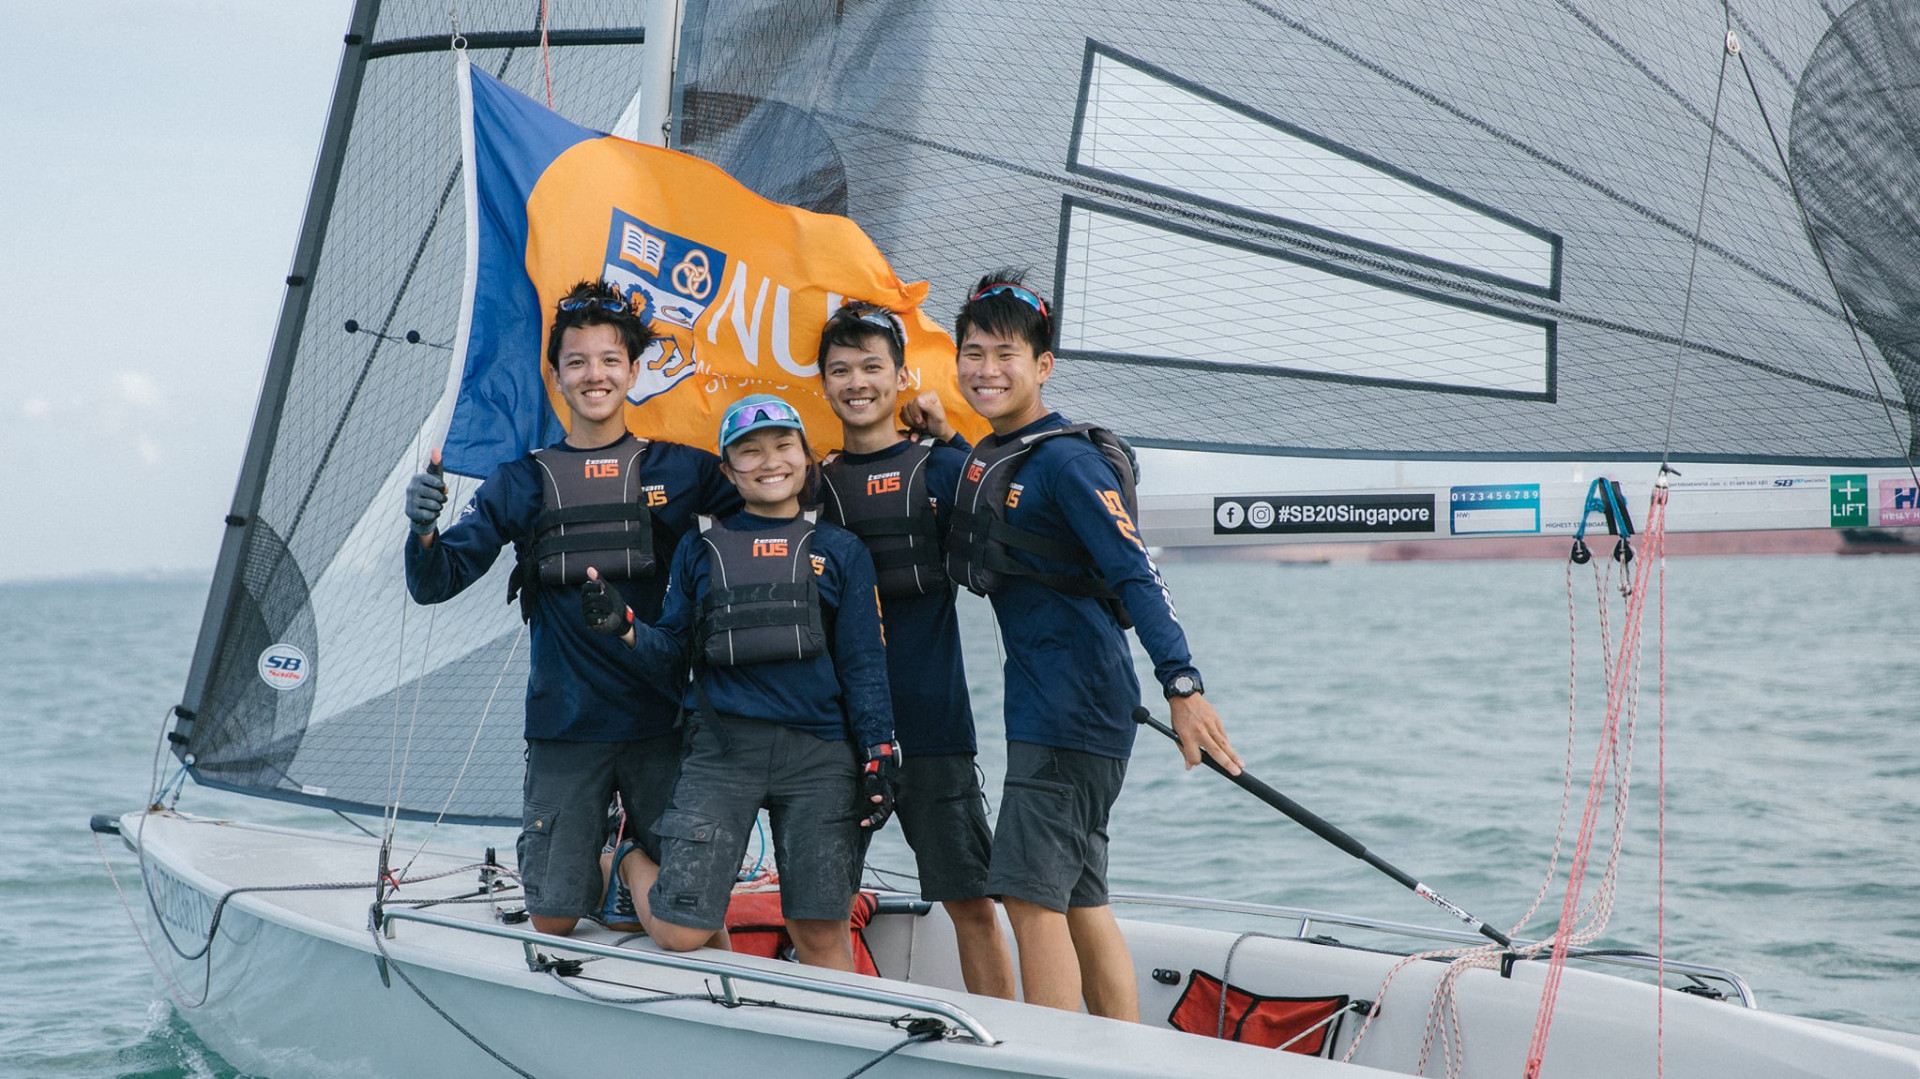 The NUS Sailing team comprising crew members Matthew Scott Lau, Andria Tan, and Keith Yeo, and helmsman Riji Wong sailed into the first position at the Asia Pacific Championship 2021. (Photo: NUS Varsity Sailing Team)